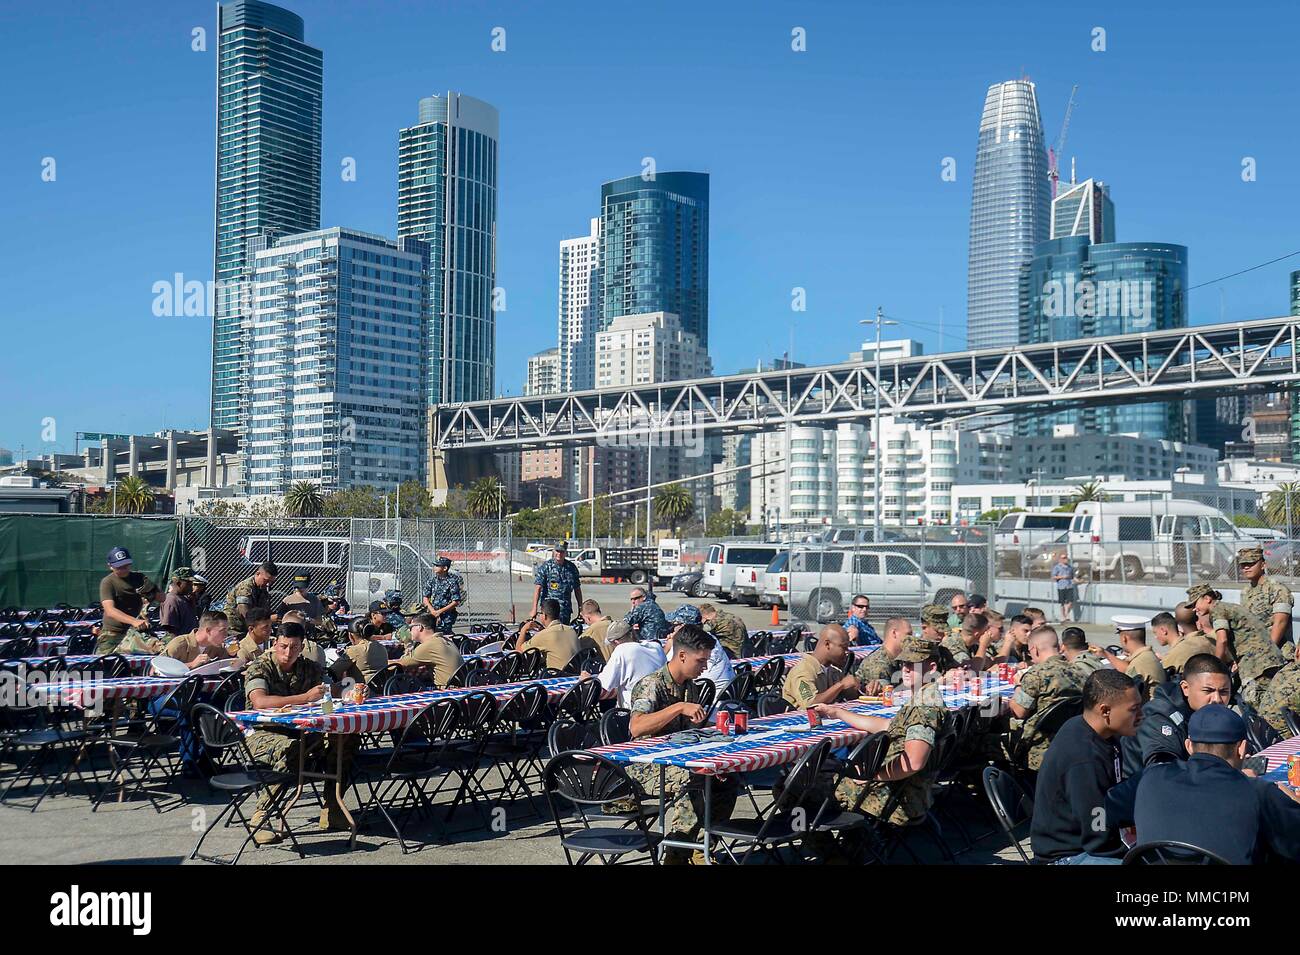 SAN FRANCISCO (Oct. 8, 2017) Sailors, Marines and Coast Guard members attend a barbecue hosted by the Oakland Navy League, Oakland Police Department and local civic organizations during Fleet Week San Francisco 2017. Fleet week provides an opportunity for the American public to meet their Navy, Marine Corps, and Coast Guard team and to experience America’s sea services. Fleet Week San Francisco will highlight naval personnel, equipment, technology, and capabilities, with an emphasis on humanitarian assistance and disaster response. (U.S. Navy photo by Mass Communication Specialist 1st Class An Stock Photo